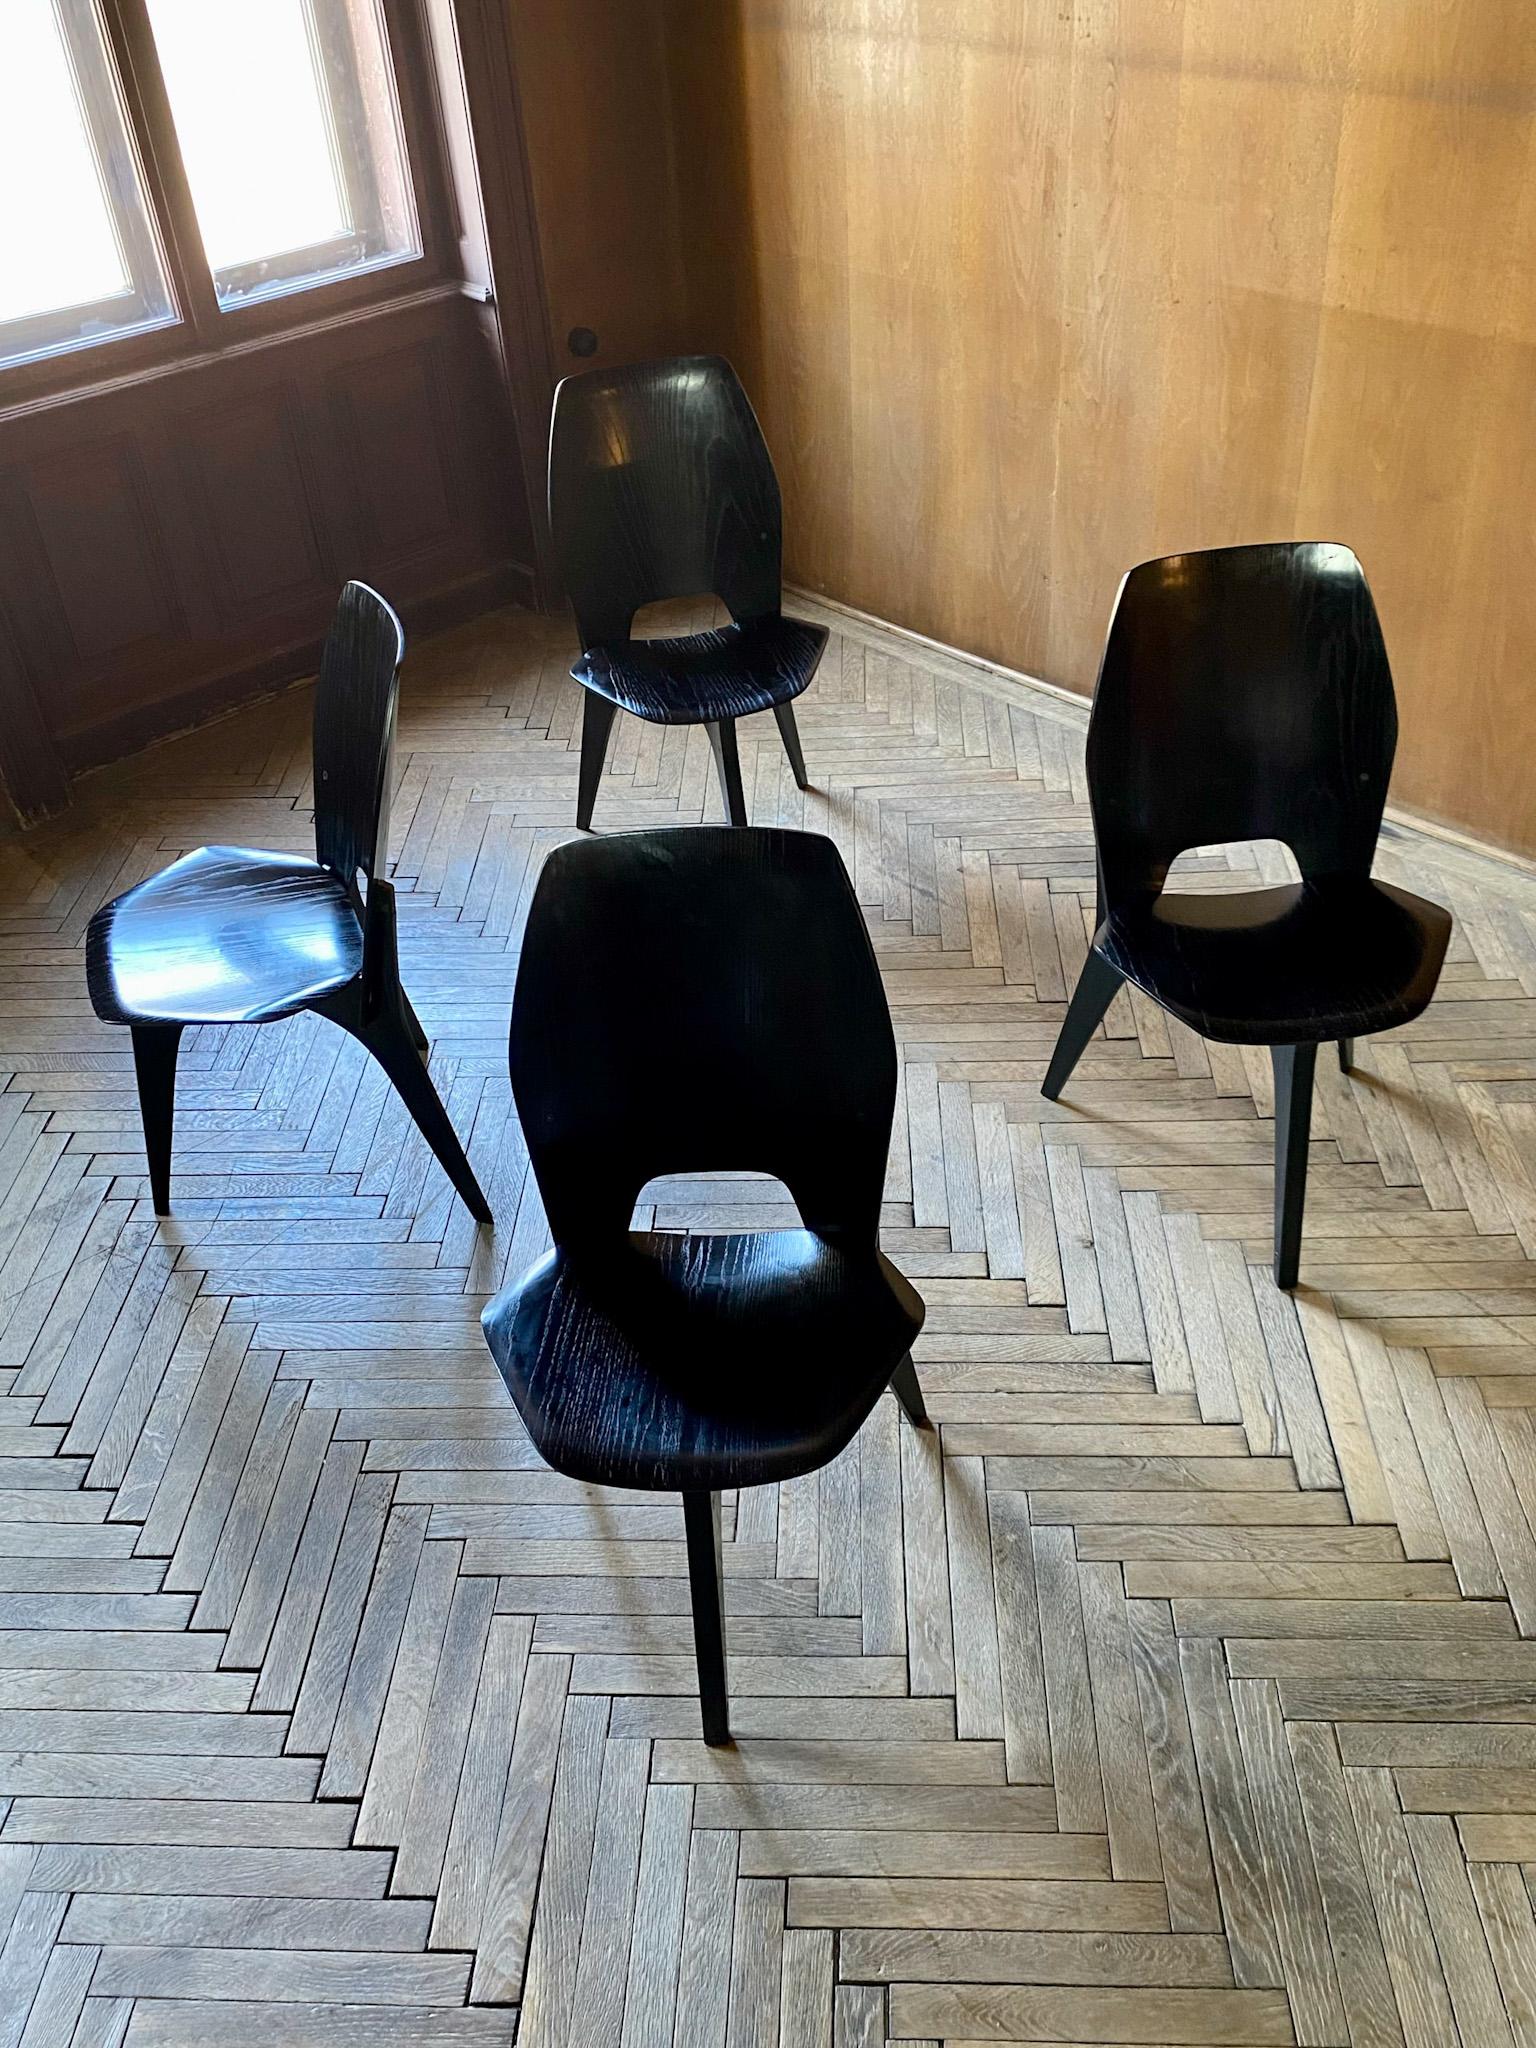 Mid-Century Modern black dining chairs by Eugenio Gerli for Tecno, Italy 1950s.

Rare set of 4 black dining chairs by Eugenio Gerli designed for the Italian manufacturer Tecno in the late 50s which reflect the skills of Italian design. These chairs